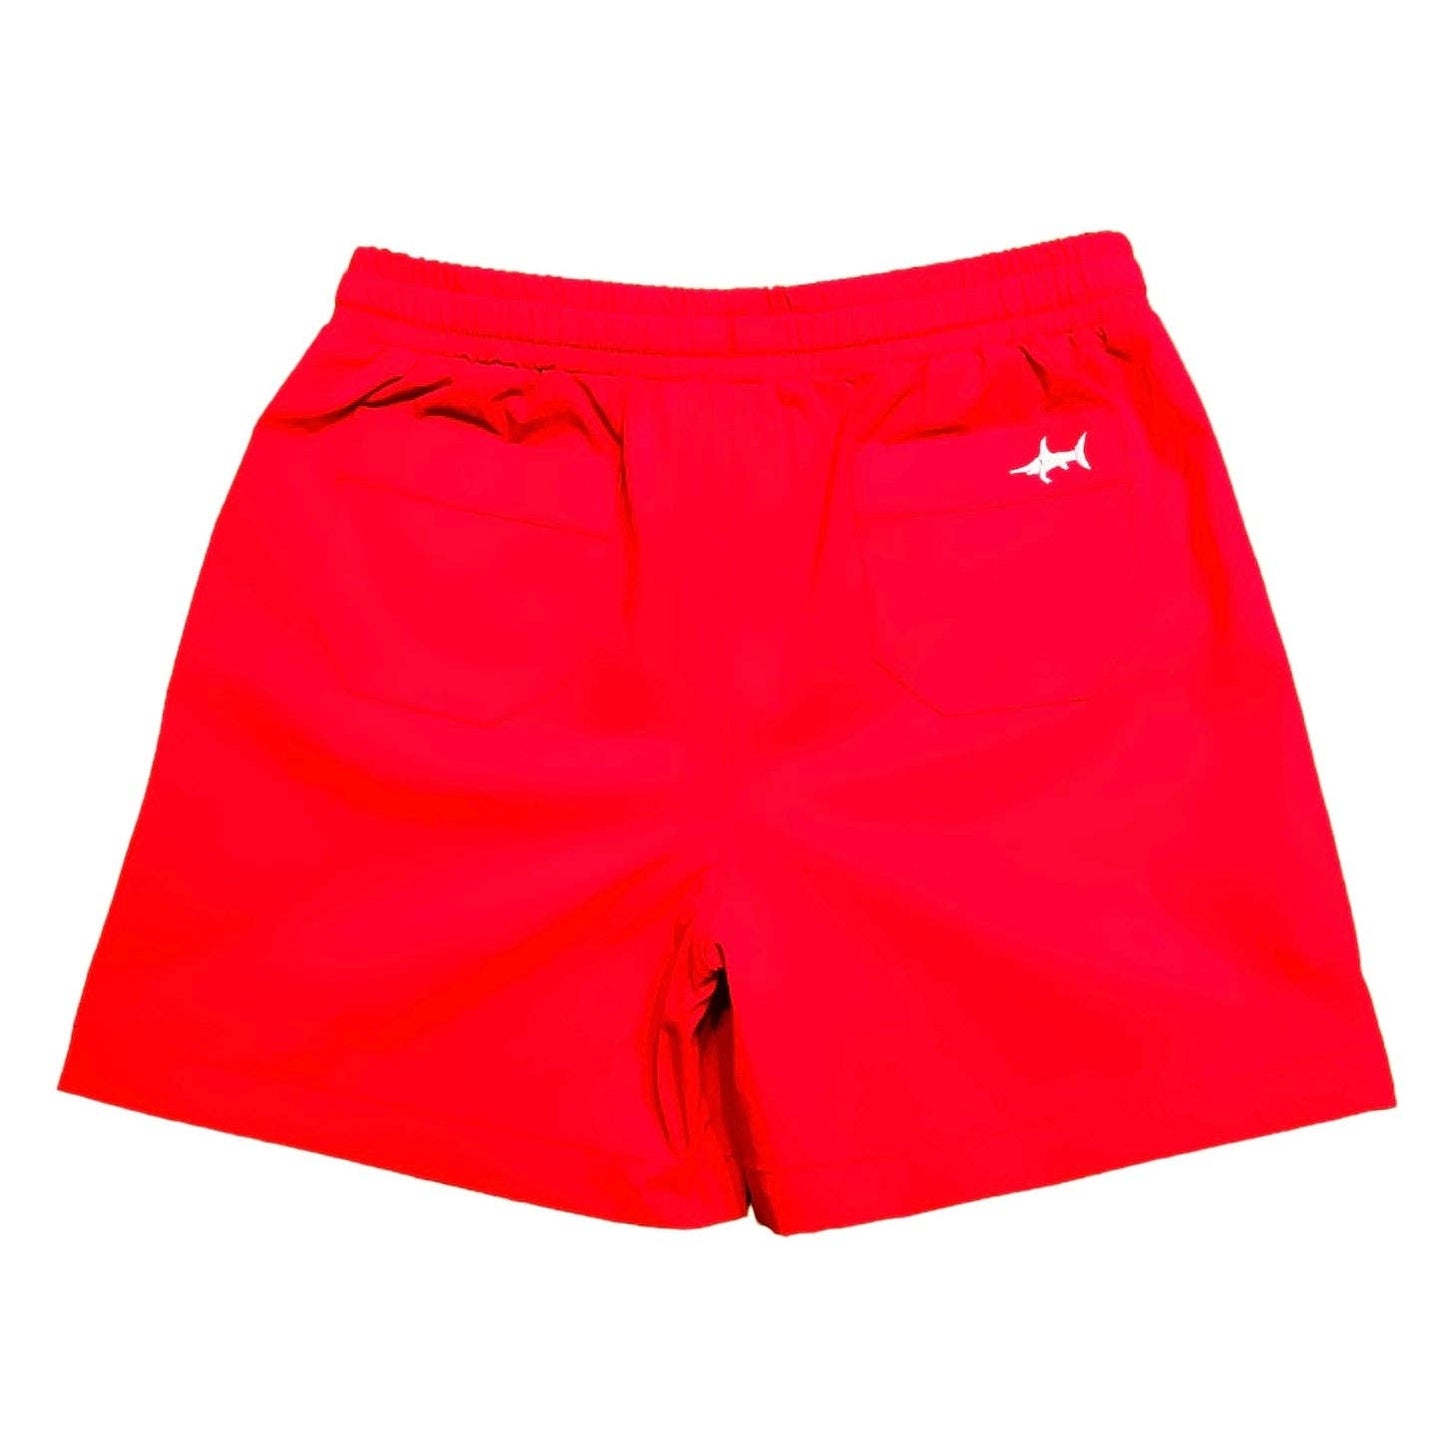 TOPSAIL BOYS PERFORMANCE SHORT RED